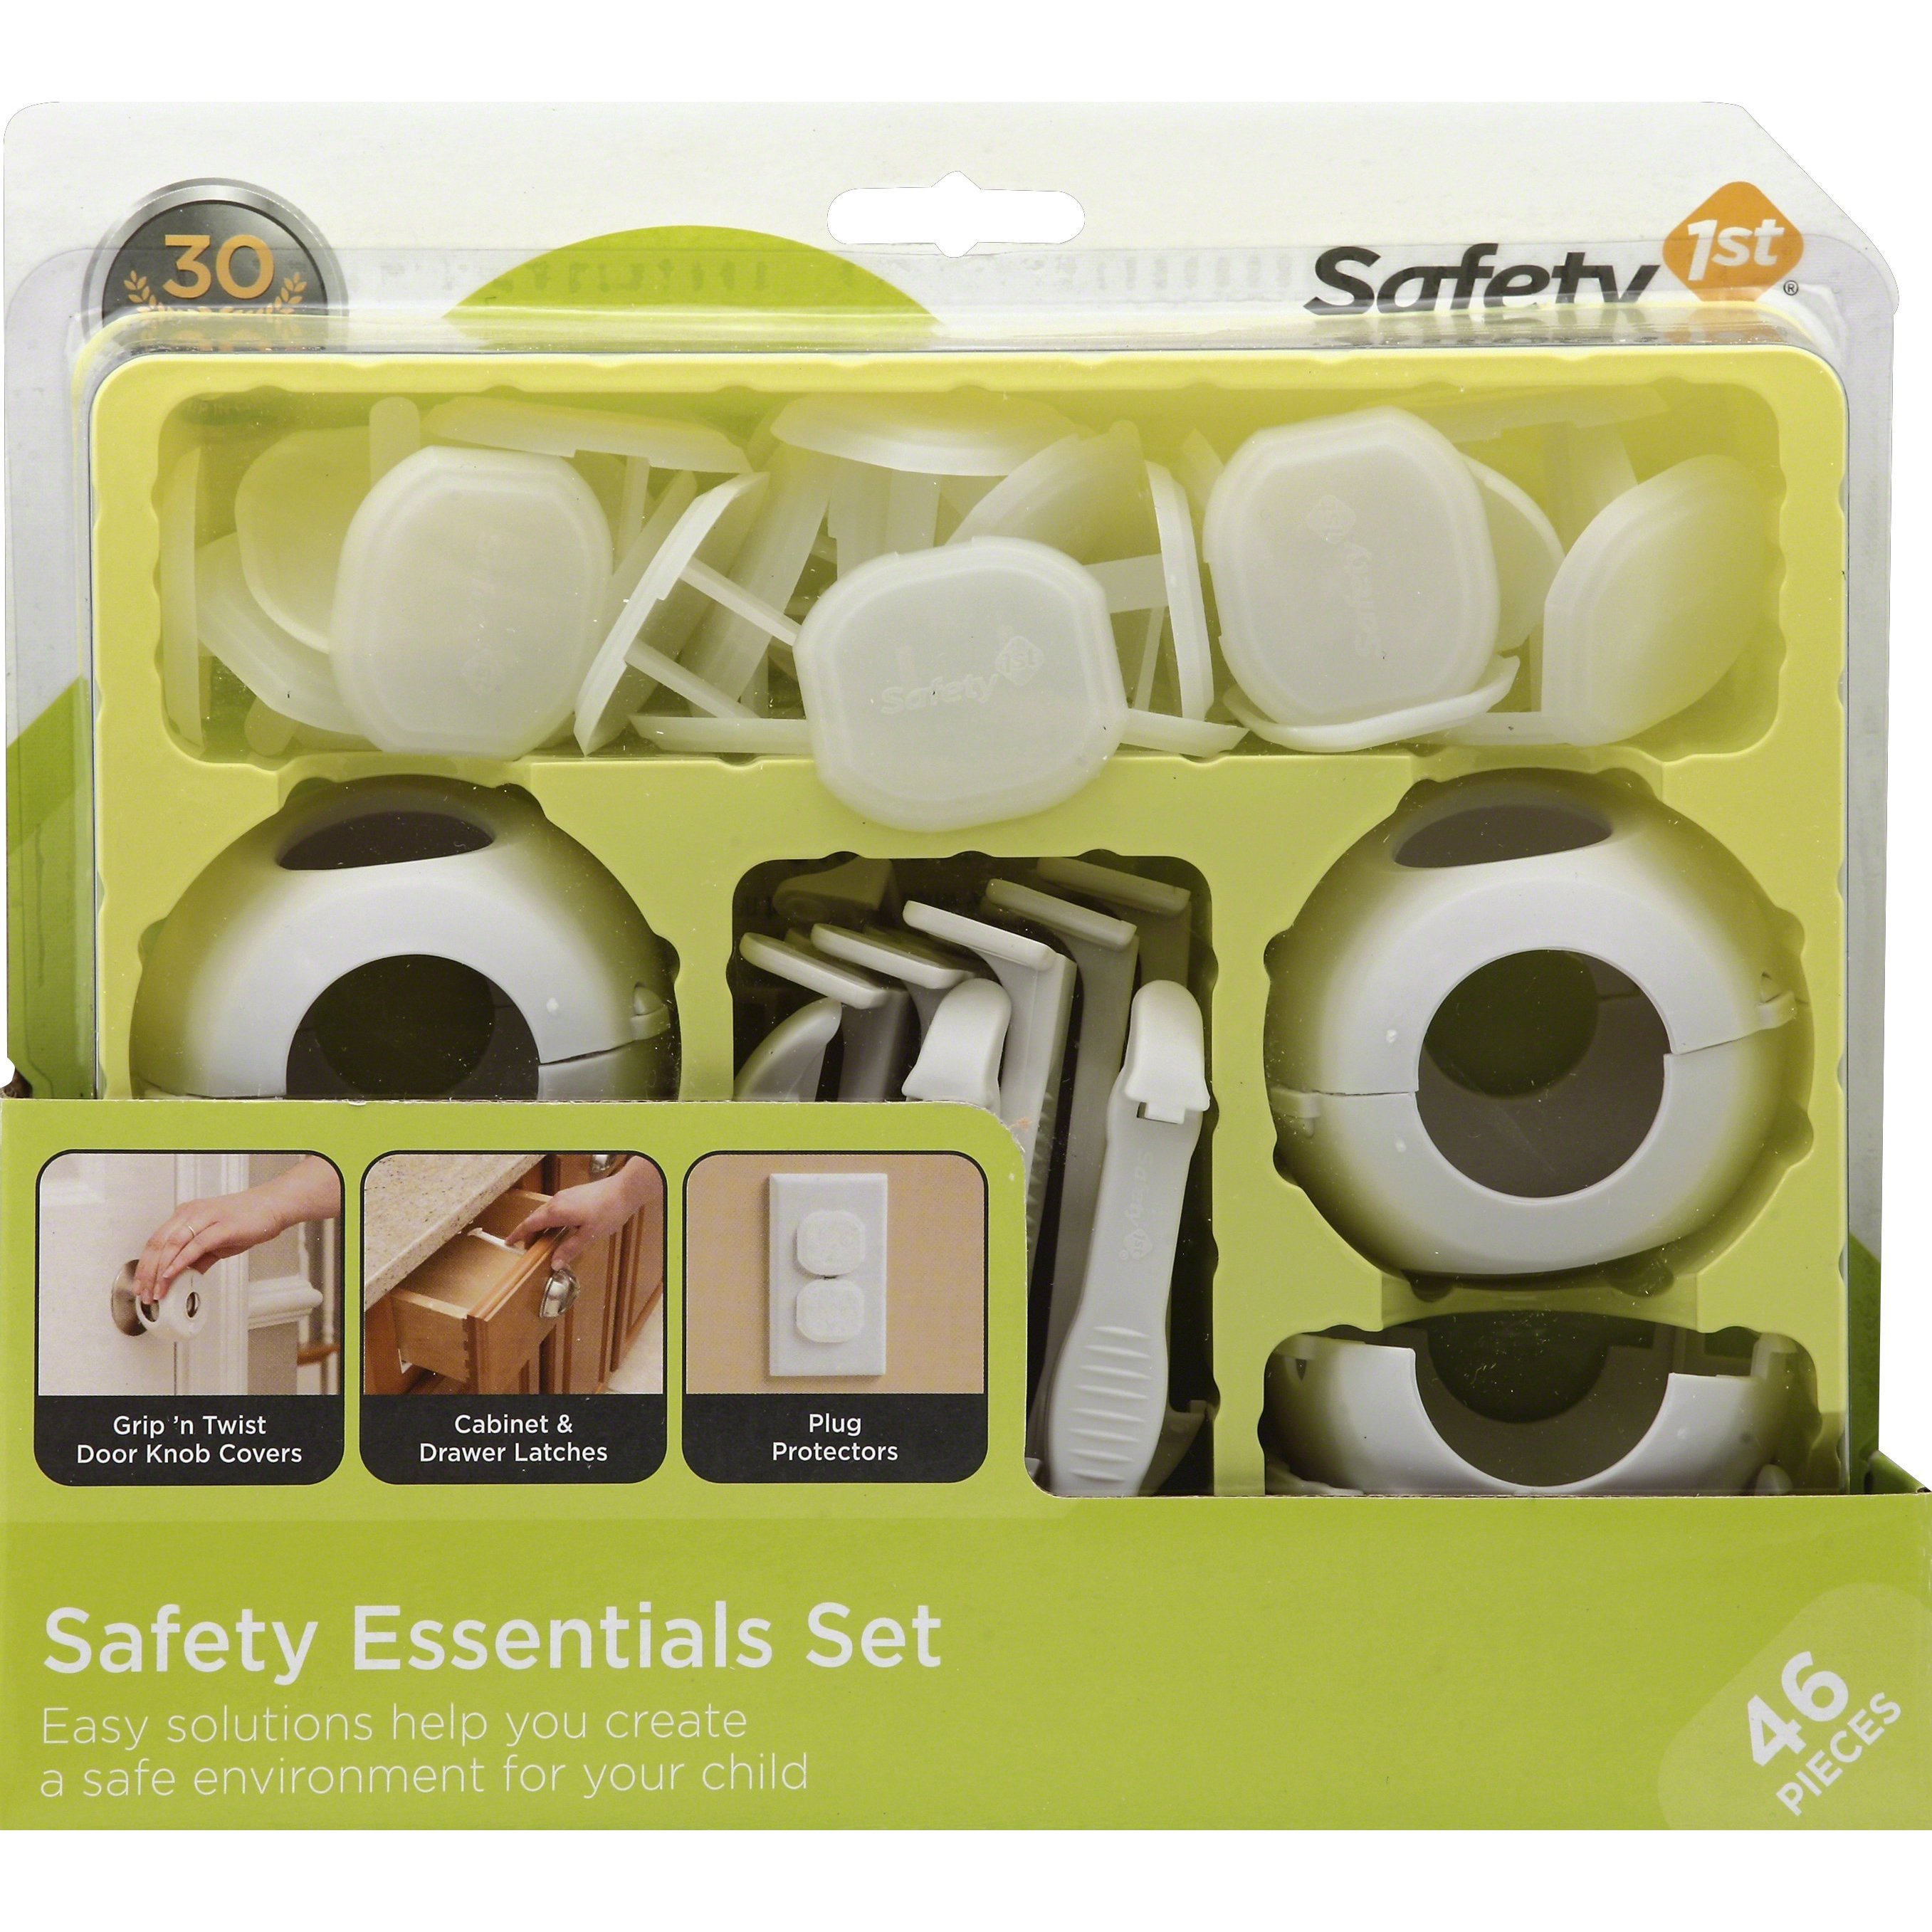 Dream Baby Safety Essentials Value Pack 3 1516 H x 10 78 W x 7 1116 D -  Office Depot